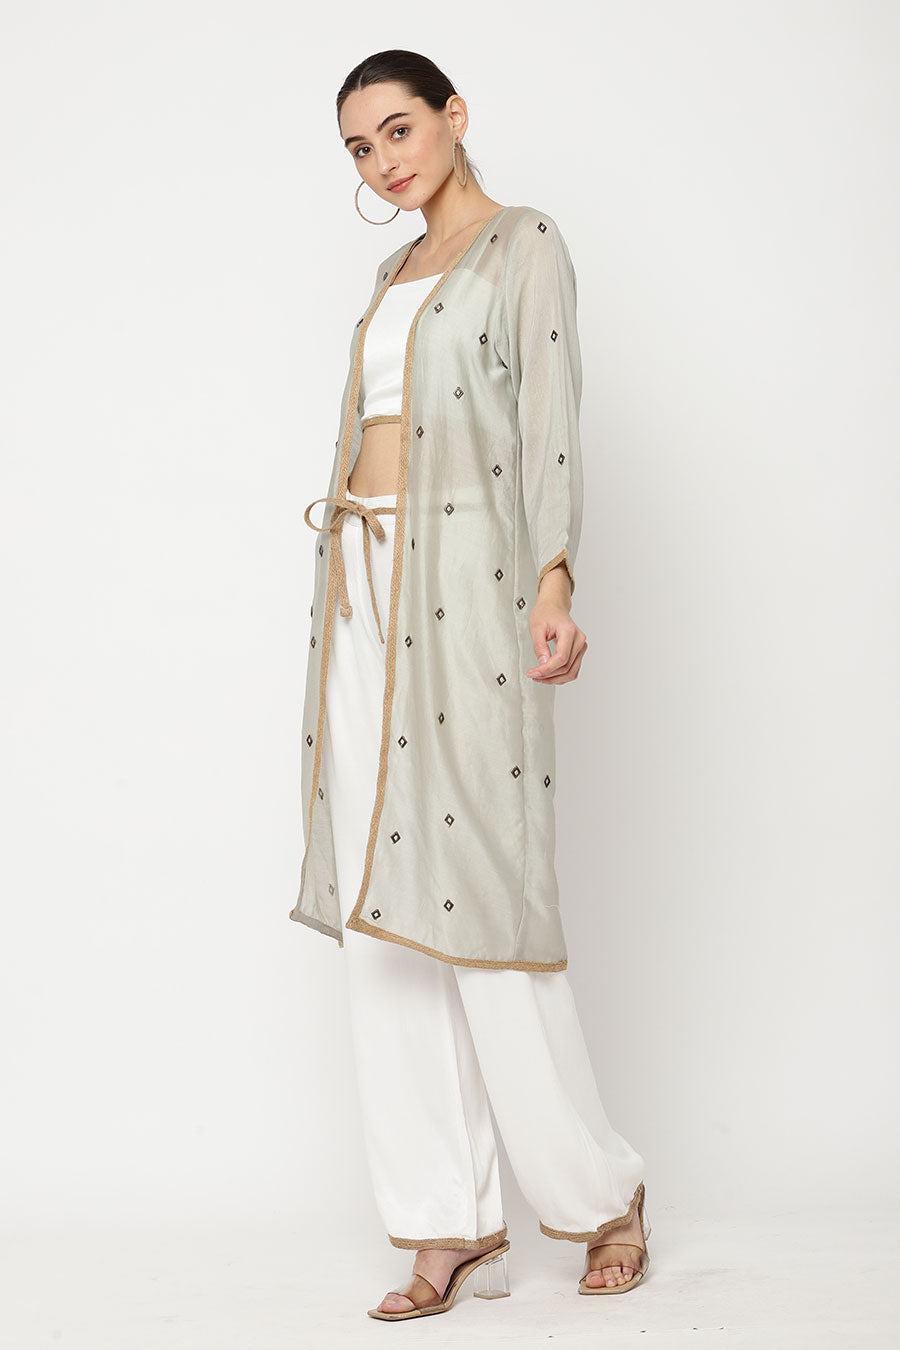 Ivory Top & Pant With Grey Embroidered Shrug Co-Ord Set